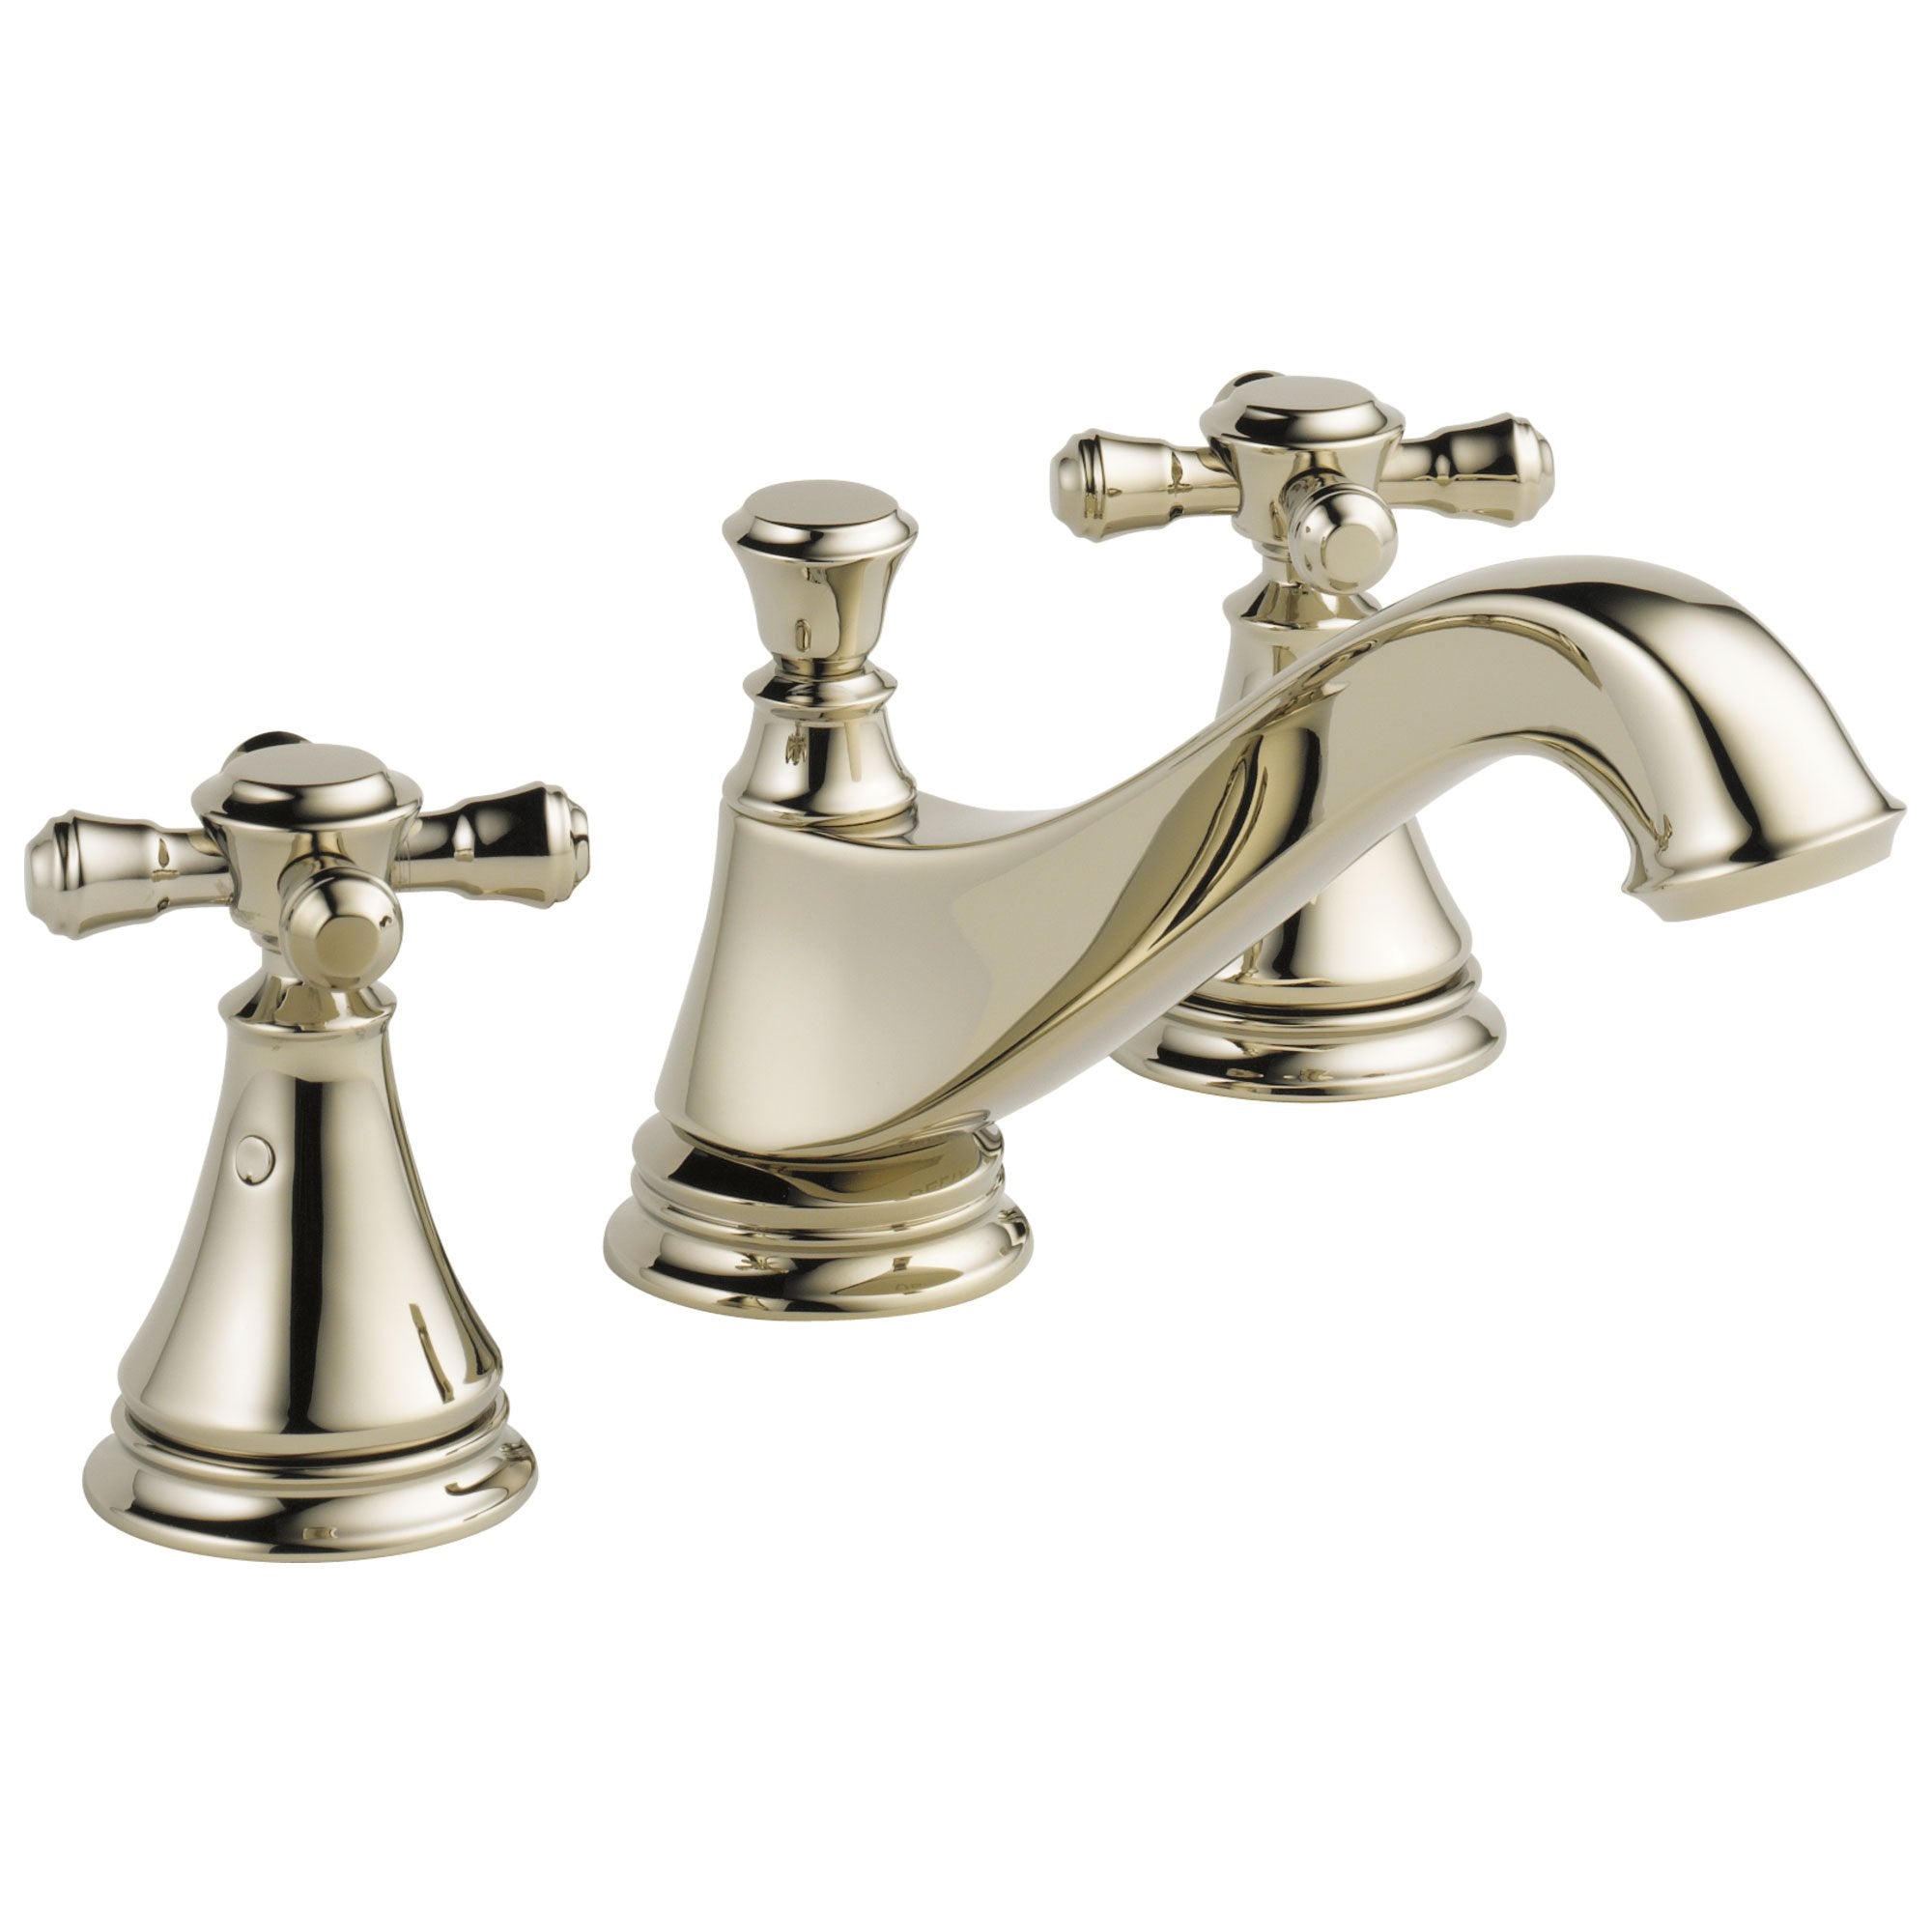 Delta Cassidy Collection Polished Nickel Traditional Low Spout Widespread Bathroom Sink Faucet INCLUDES Two Cross Handles and Drain D1795V